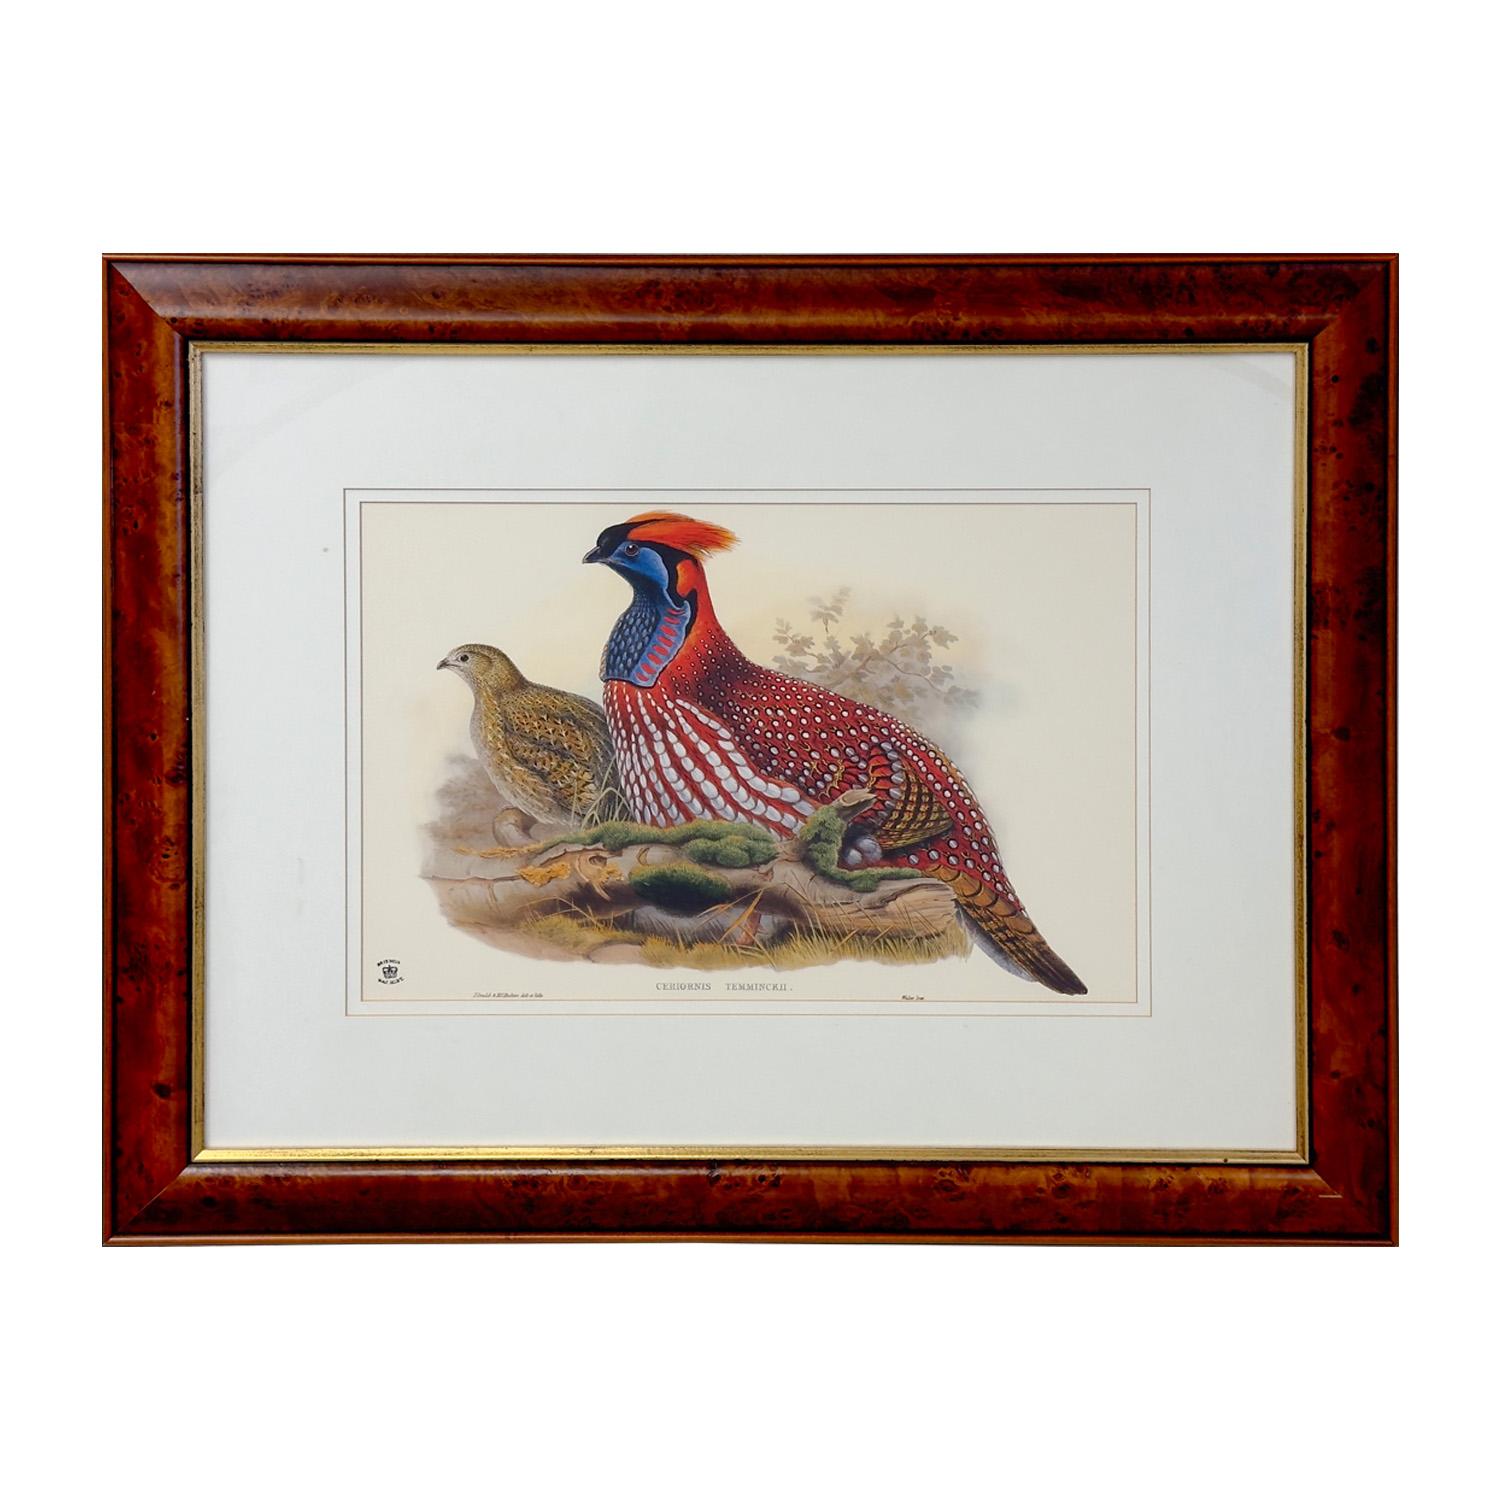 John Gould and Henry Constantine Richter Animal Print -  John Gould & Henry Constantine Richter Birds of Asia Temminck's Tragopan Print 